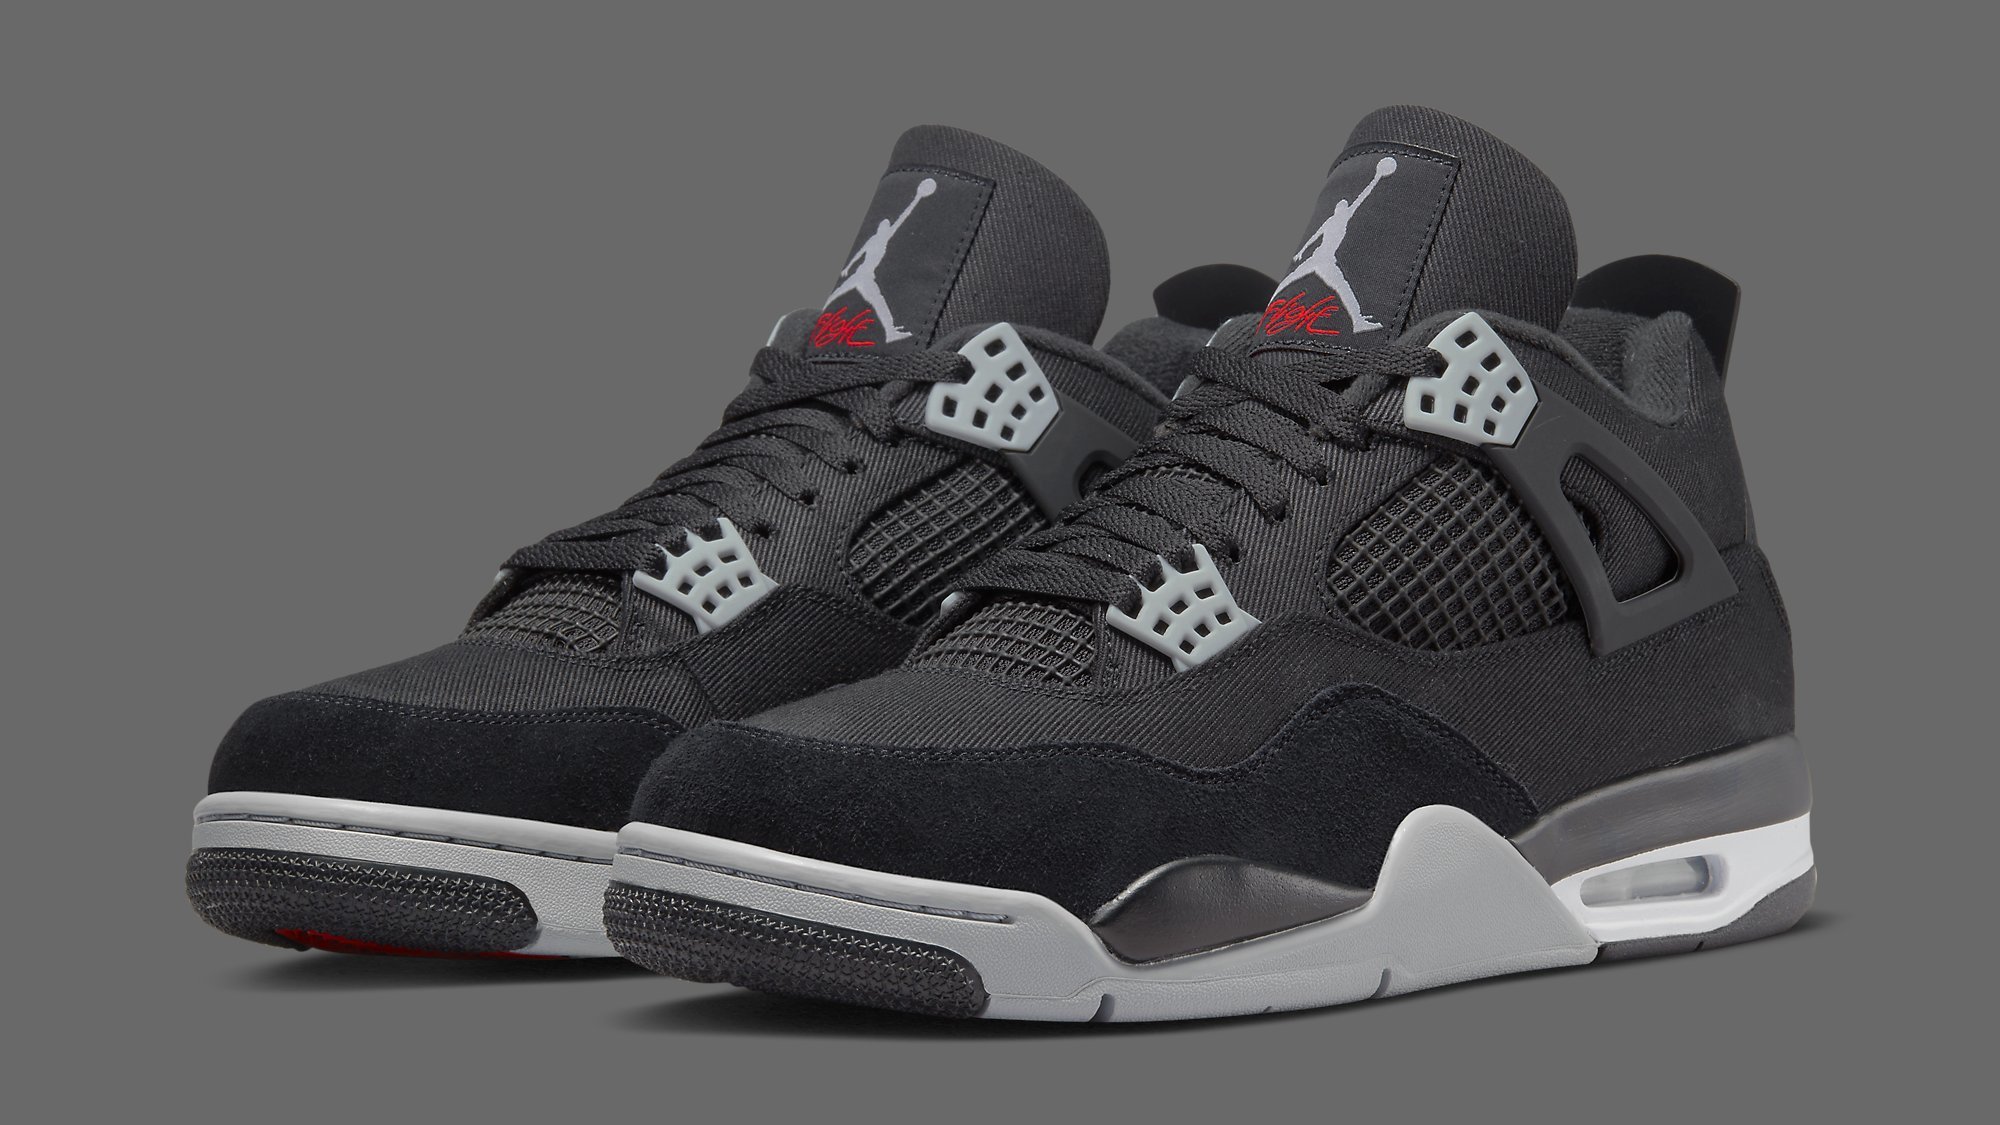 Air Jordan 4 'Black Canvas' Release Date October 2022 Dh7138-006 | Sole  Collector